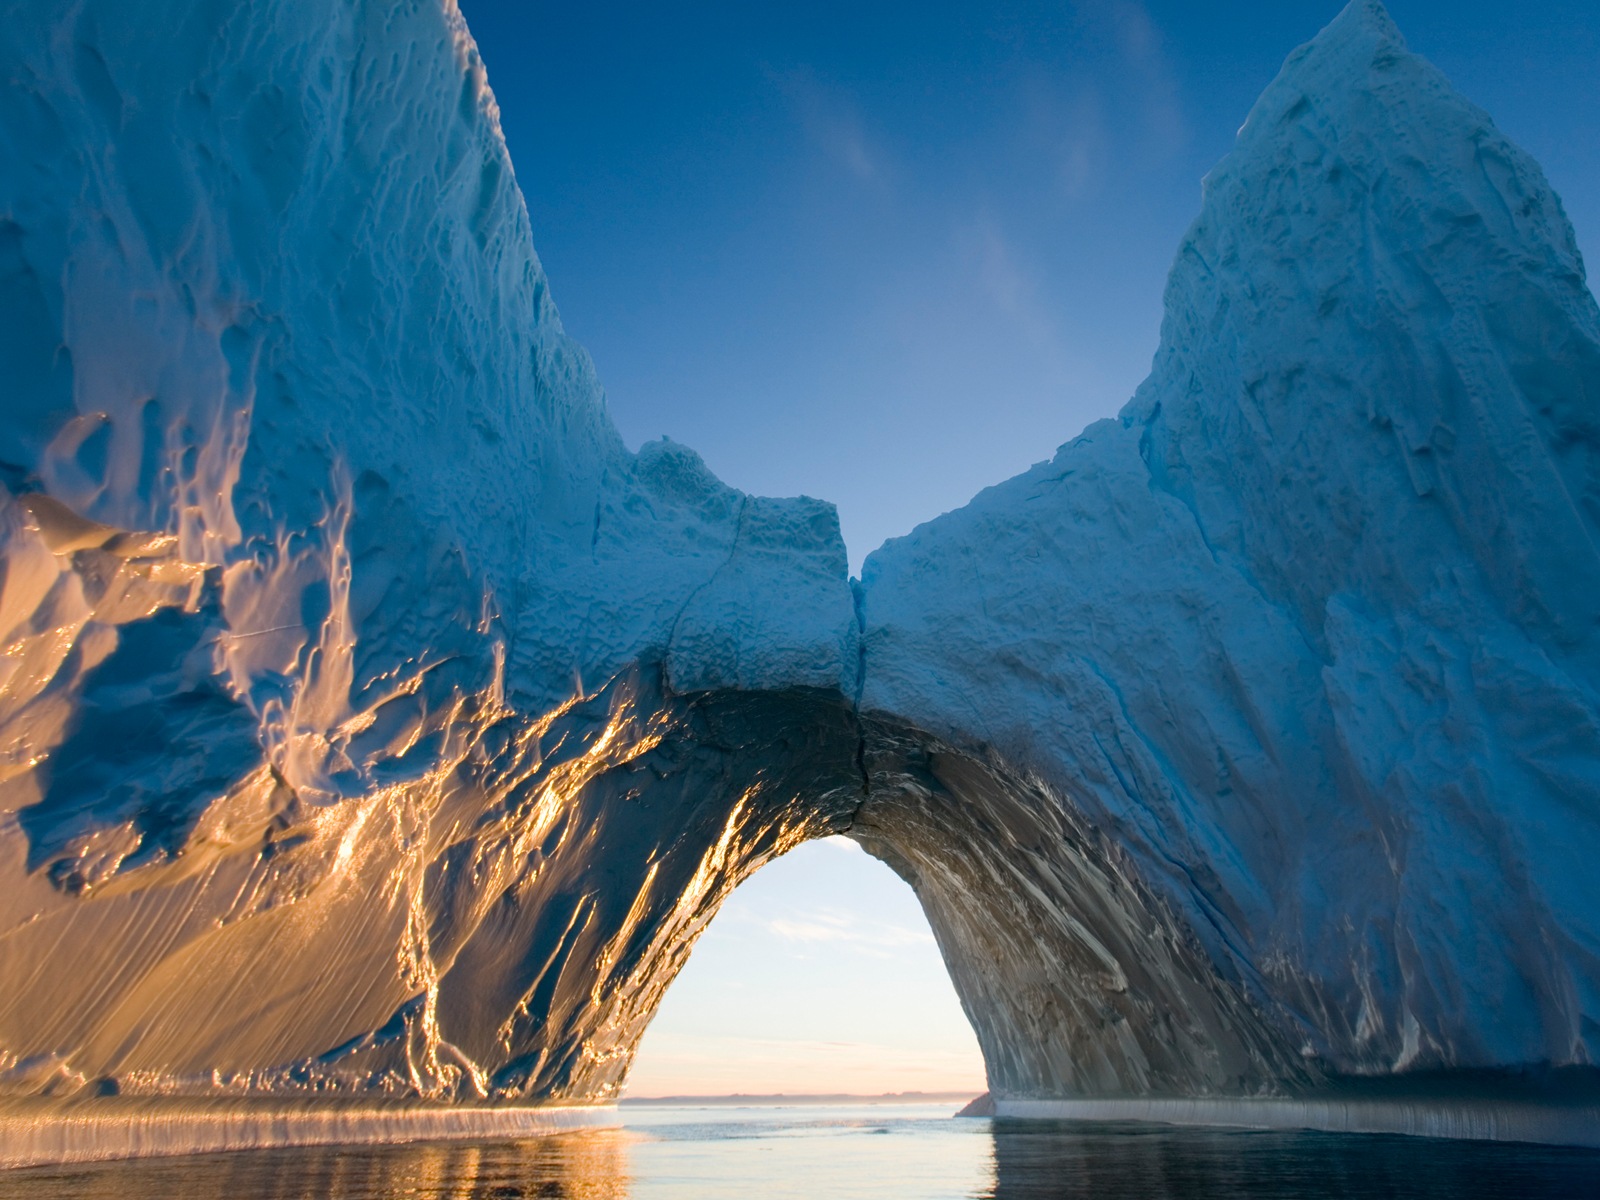 Windows 8 Wallpapers: Arctic, the nature ecological landscape, arctic animals #3 - 1600x1200